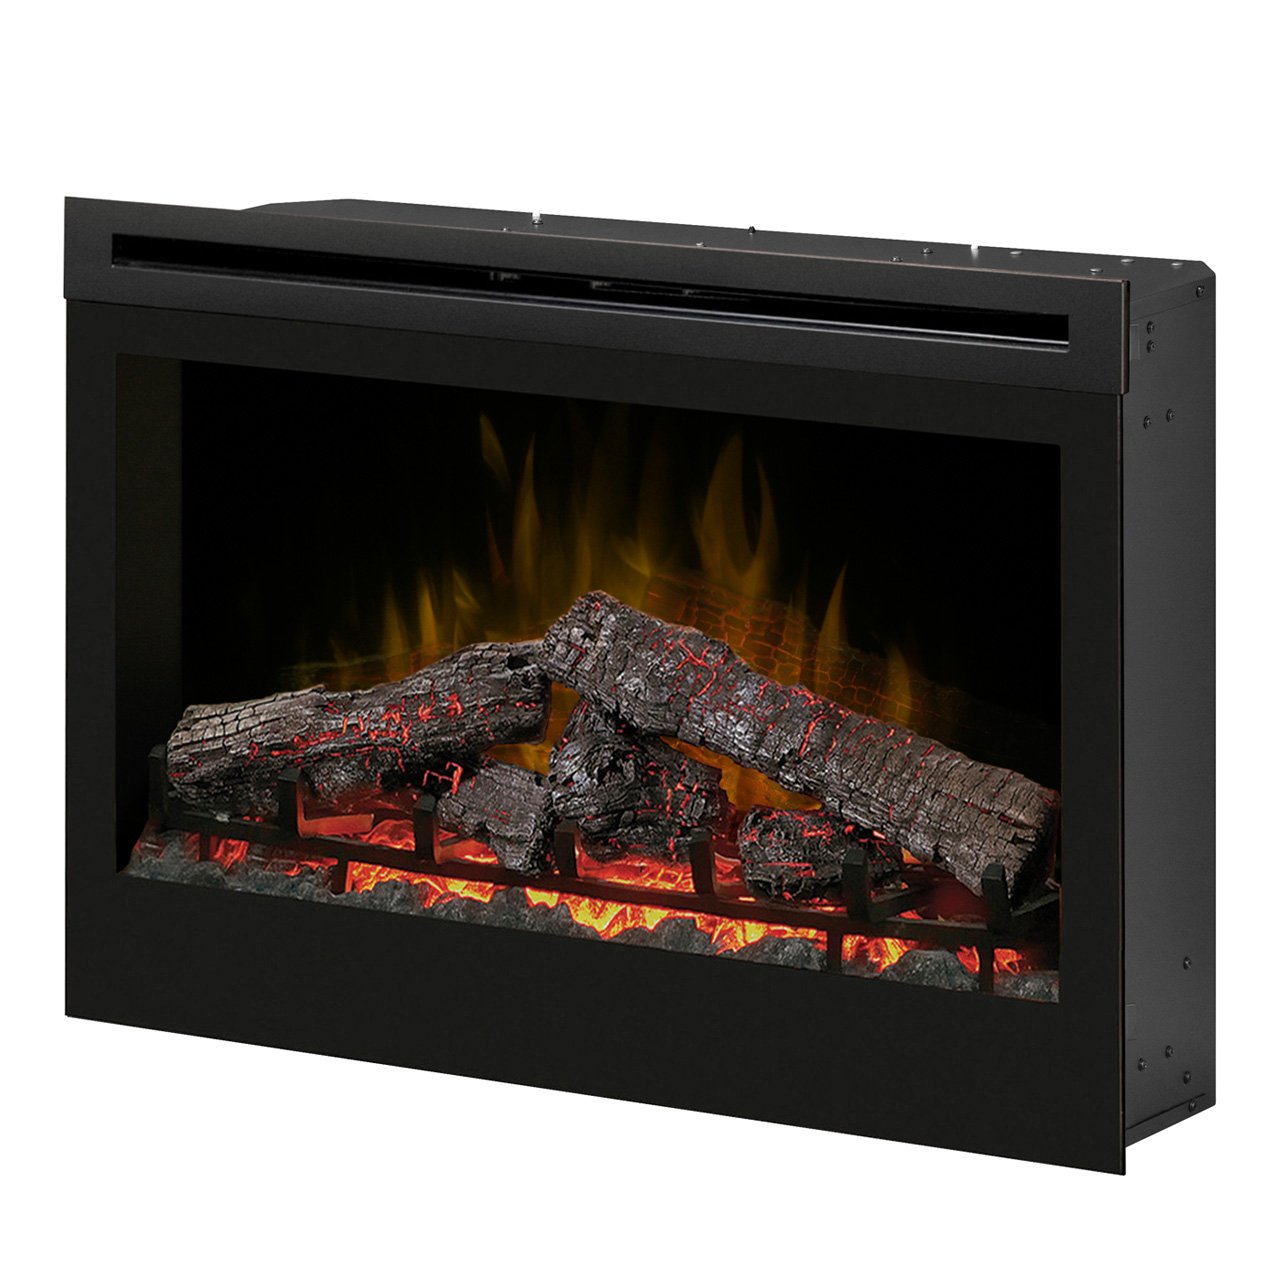 Show Me Fireplaces Awesome Dimplex Df3033st 33 Inch Self Trimming Electric Fireplace Insert